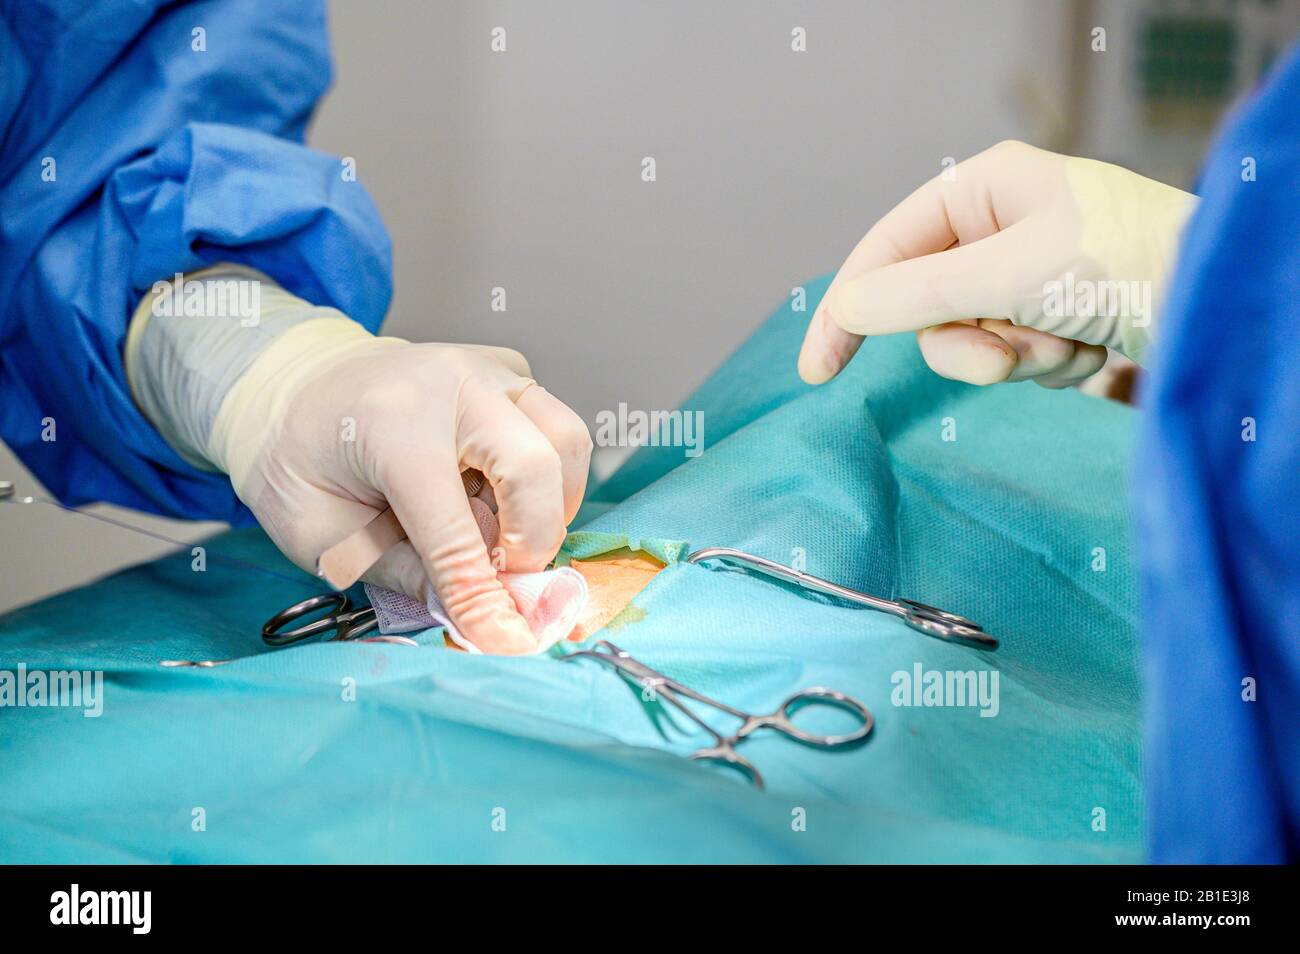 Operation process on a patient. Surgeon's hands in protective gloves doing surgery with medical tools . Stock Photo